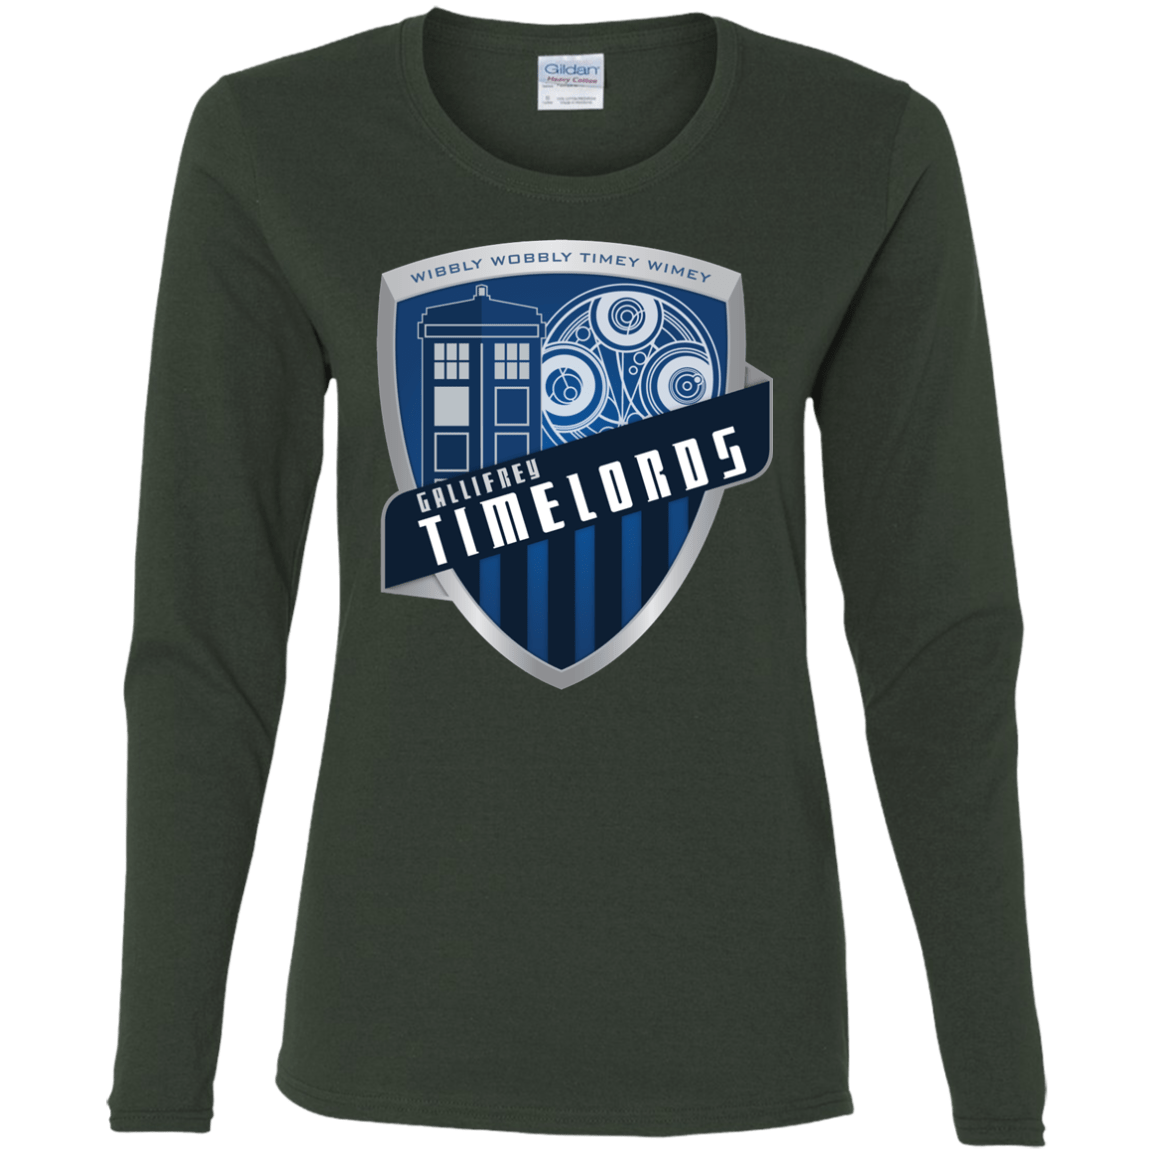 T-Shirts Forest / S Gallifrey Timelords Women's Long Sleeve T-Shirt